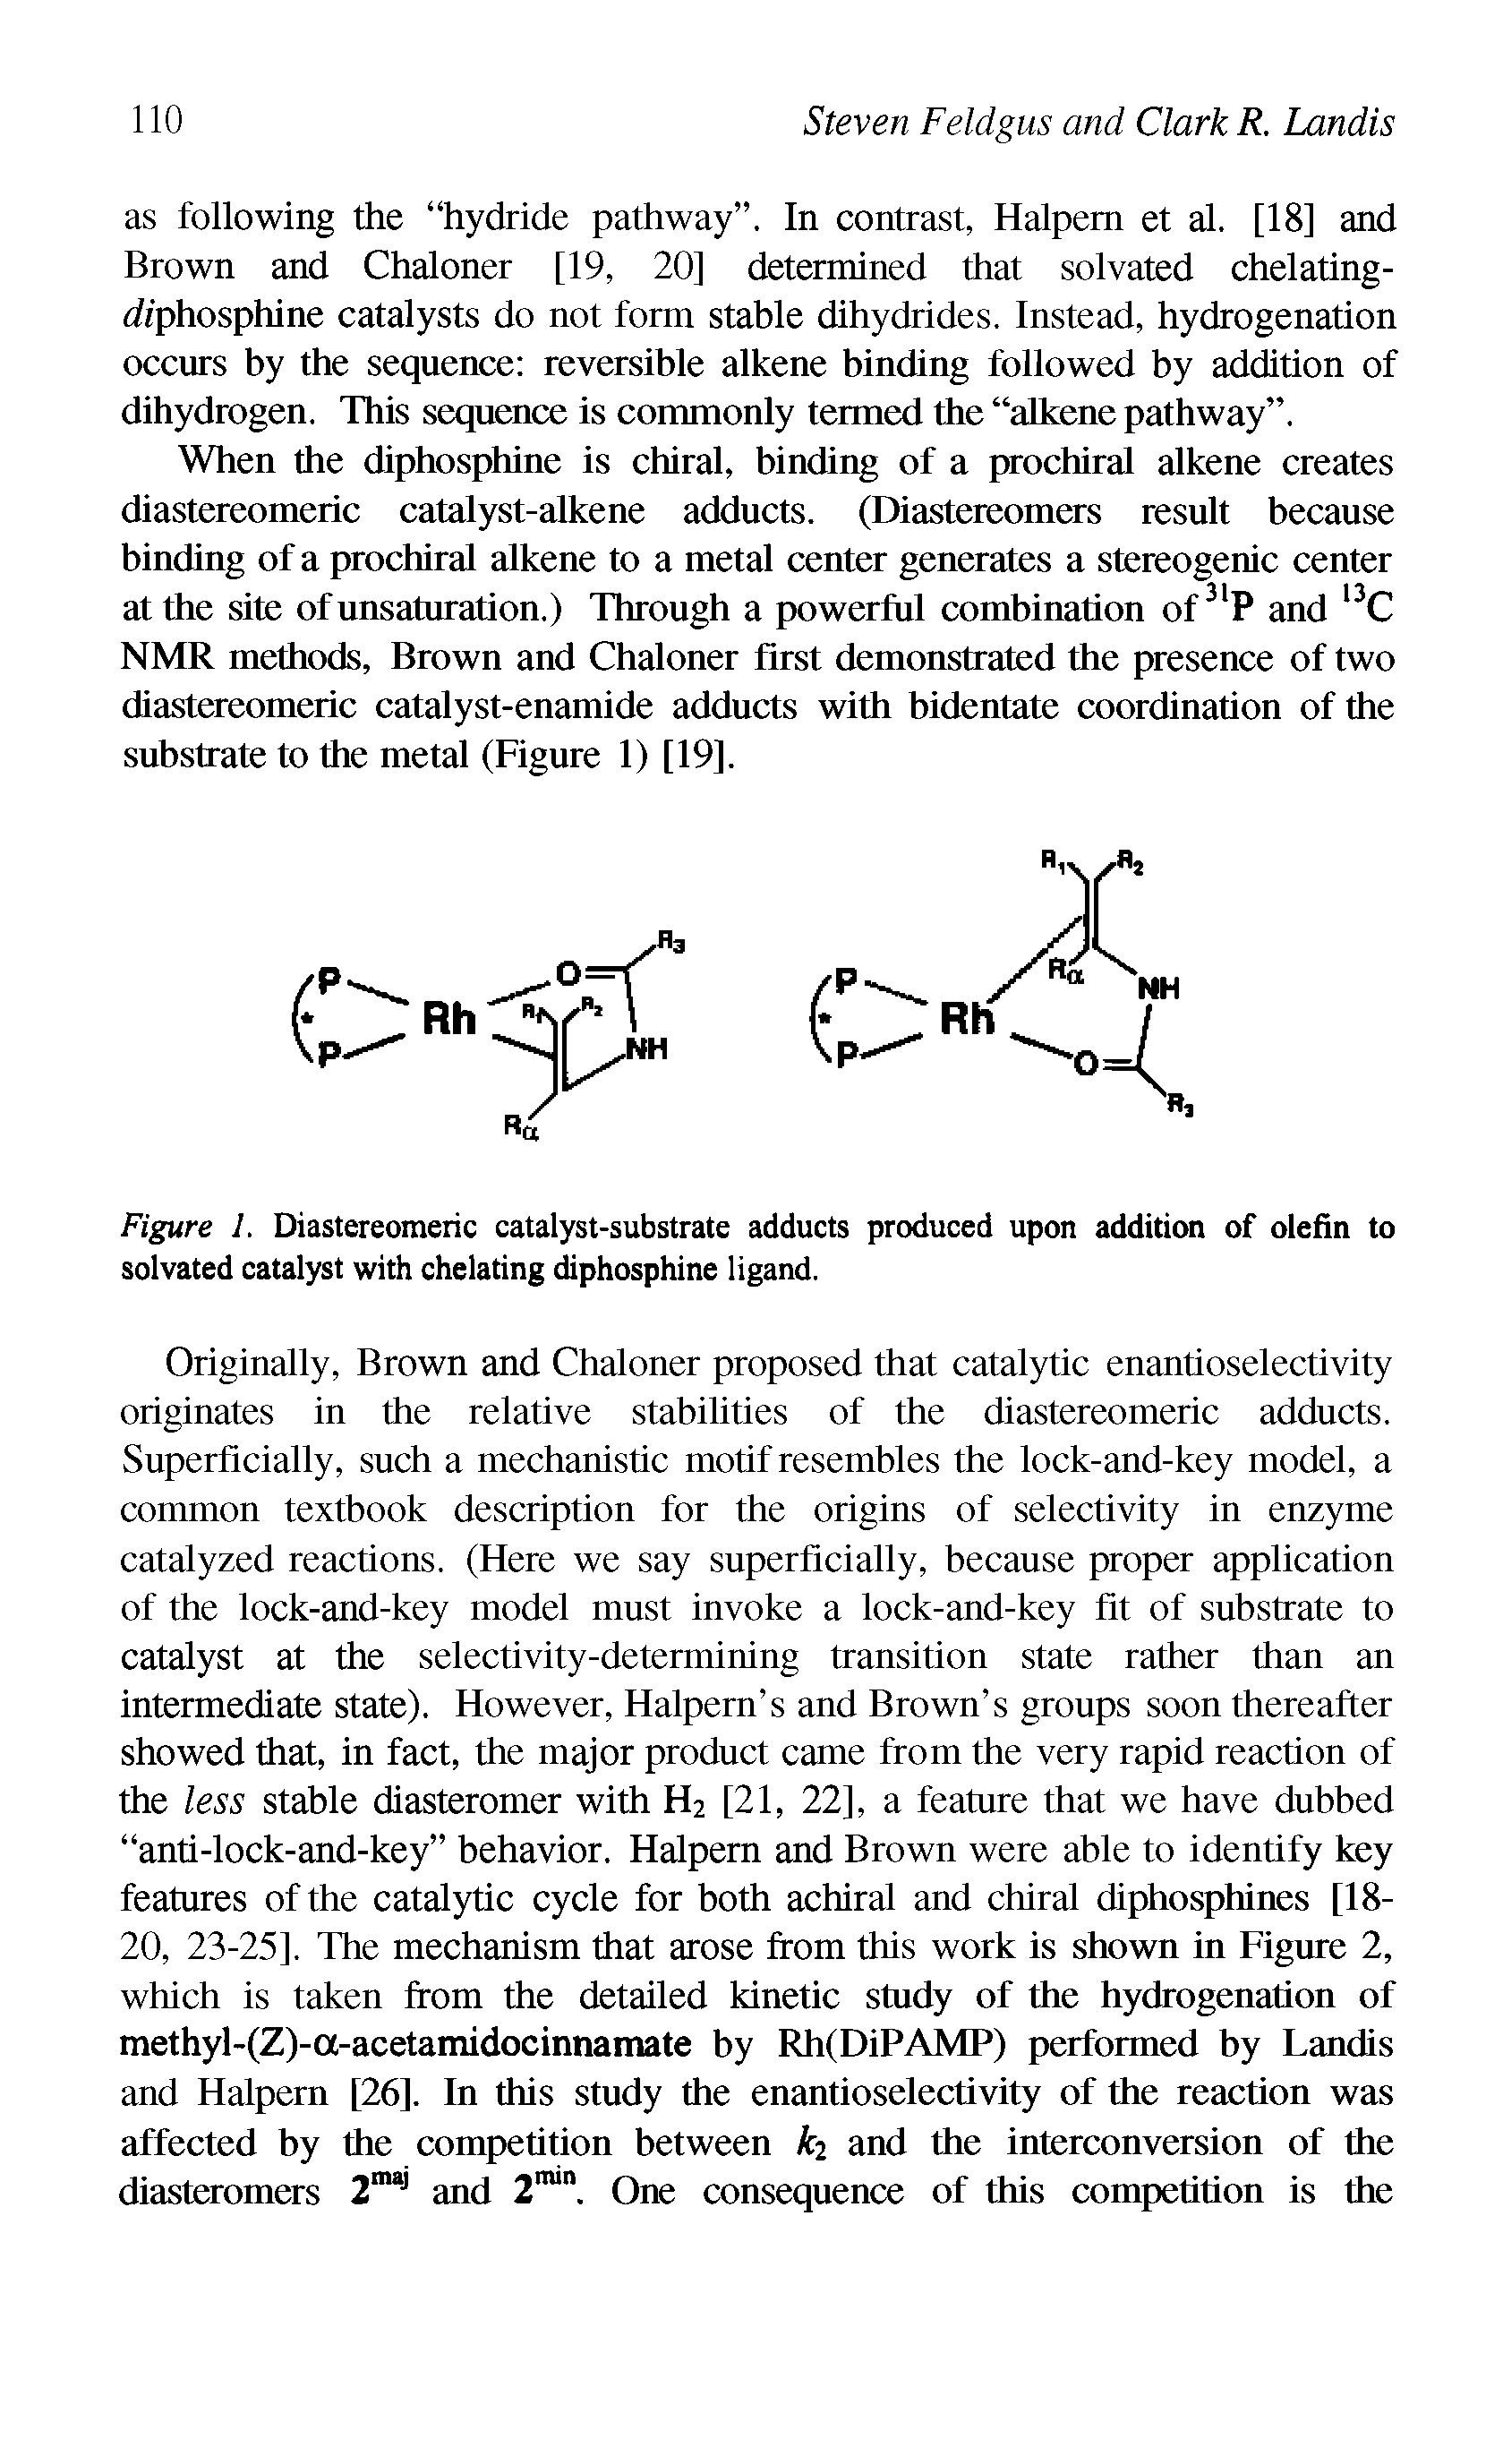 Figure 1. Diastereomeric catalyst-substrate adducts produced upon addition of olefin to solvated catalyst with chelating diphosphine ligand.